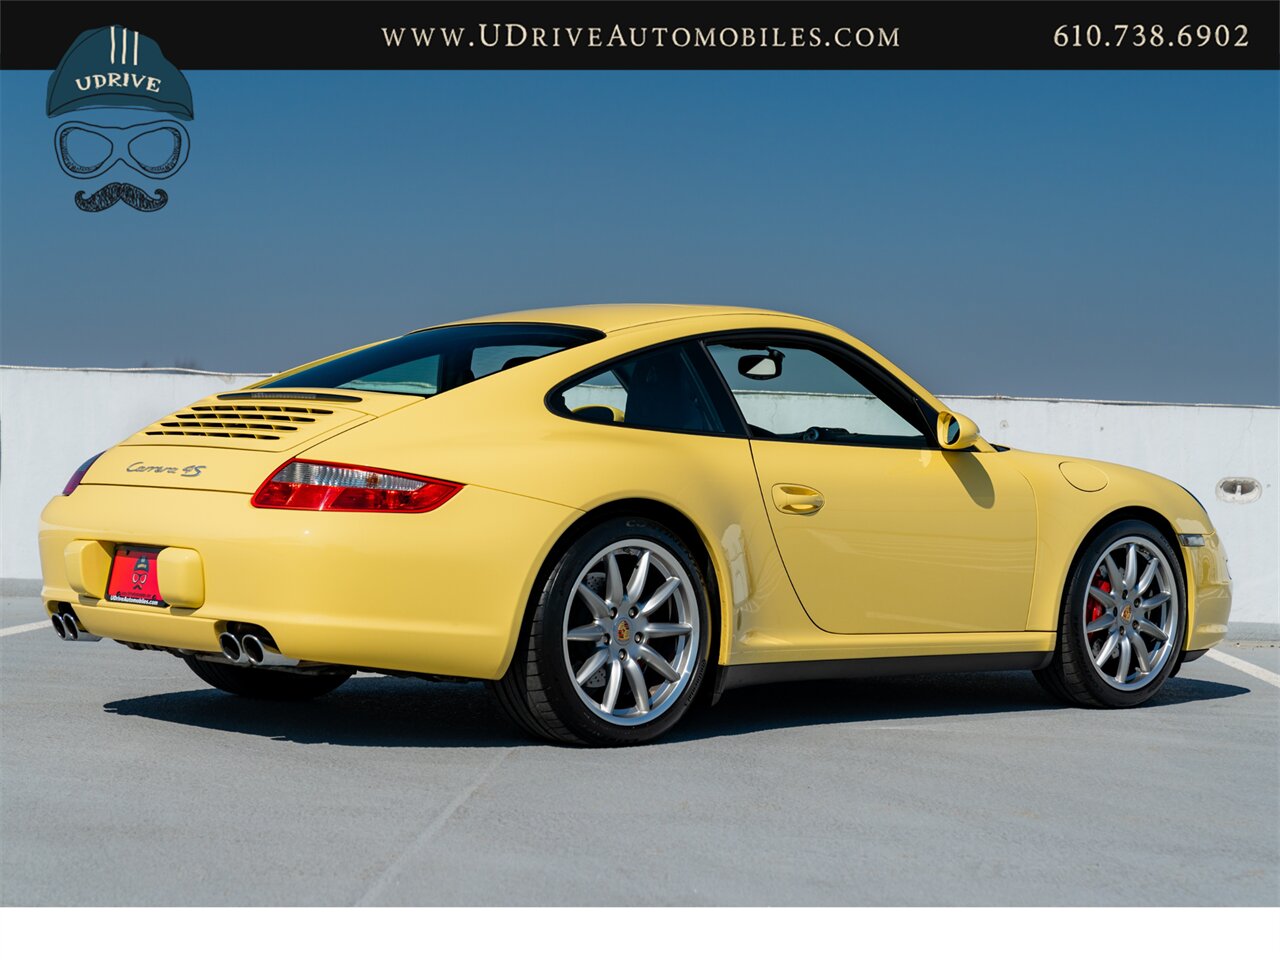 2007 Porsche 911 Carrera 4S 997 C4S Paint To Sample Pastel Yellow  6 Speed Sport Chrono Full Leather Yellow Gauges - Photo 18 - West Chester, PA 19382